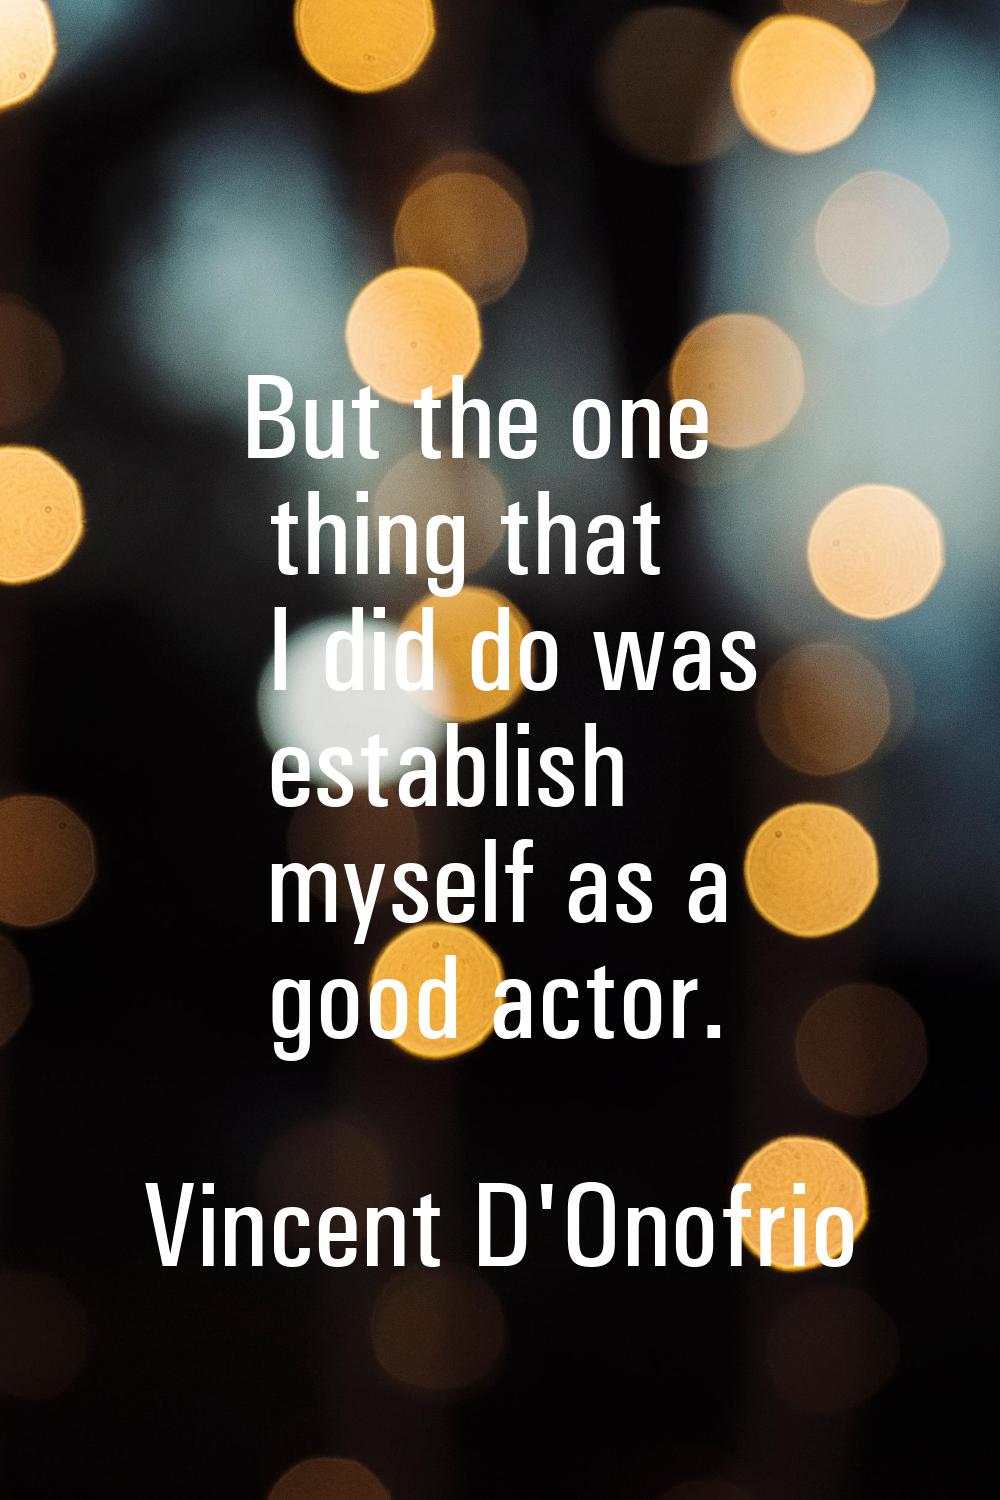 But the one thing that I did do was establish myself as a good actor.